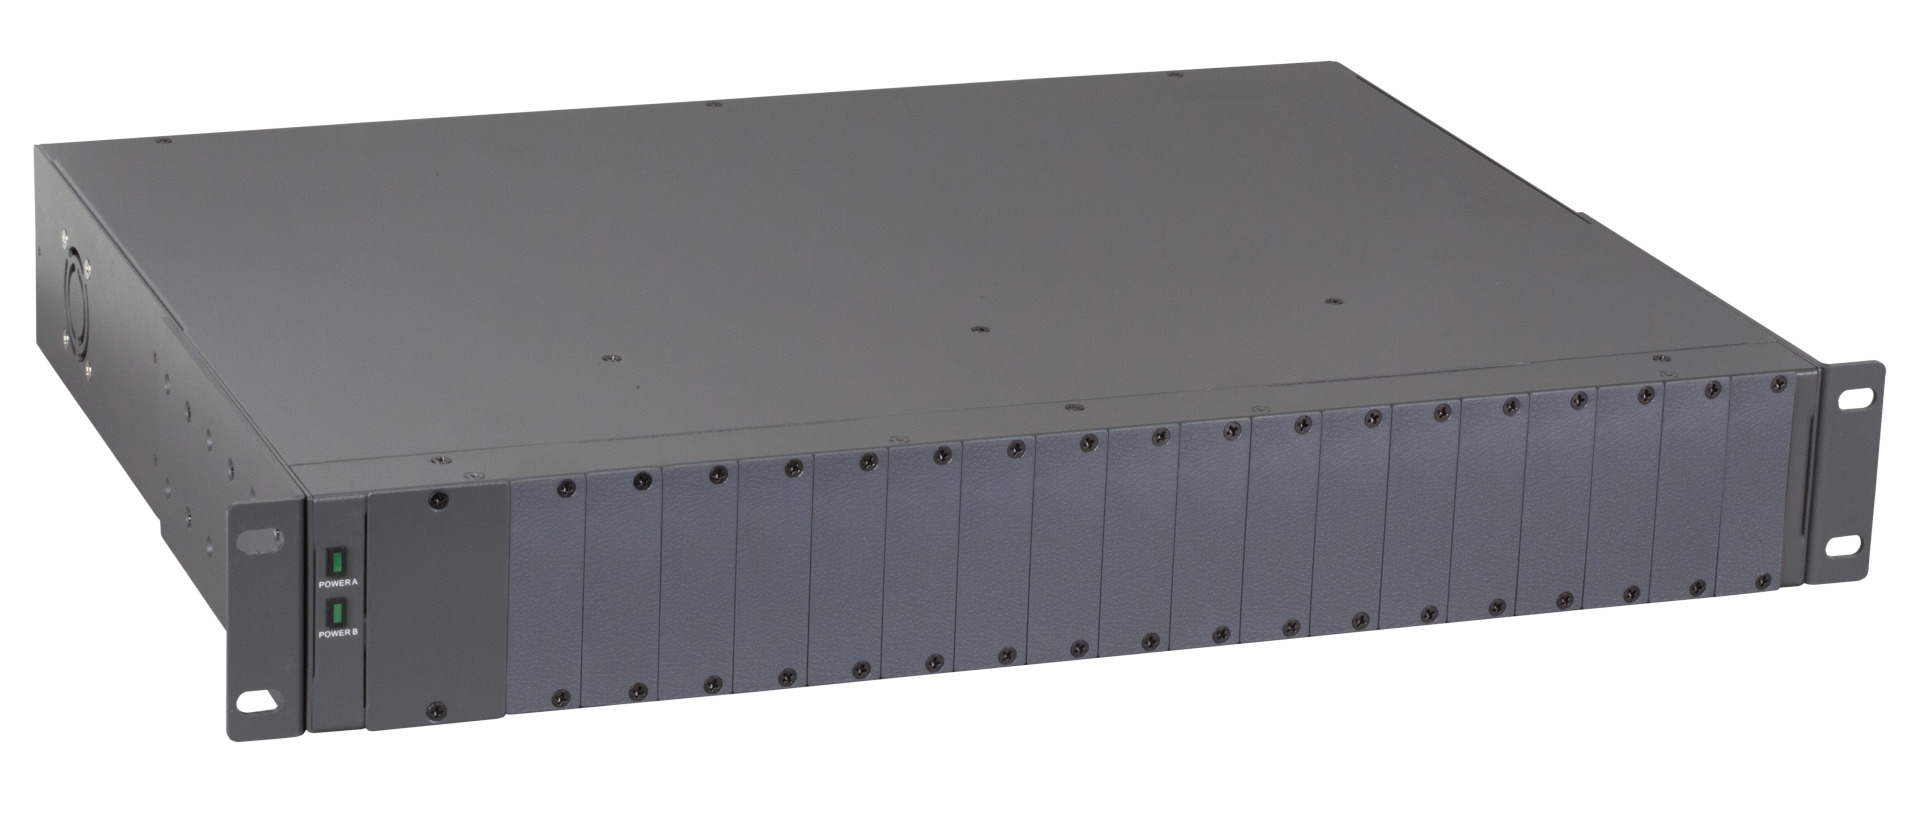 1,5HE 19" Rack Chassis für MCT Konverter, 18 Slots, Unmanaged, inkl. 2x Netzteil